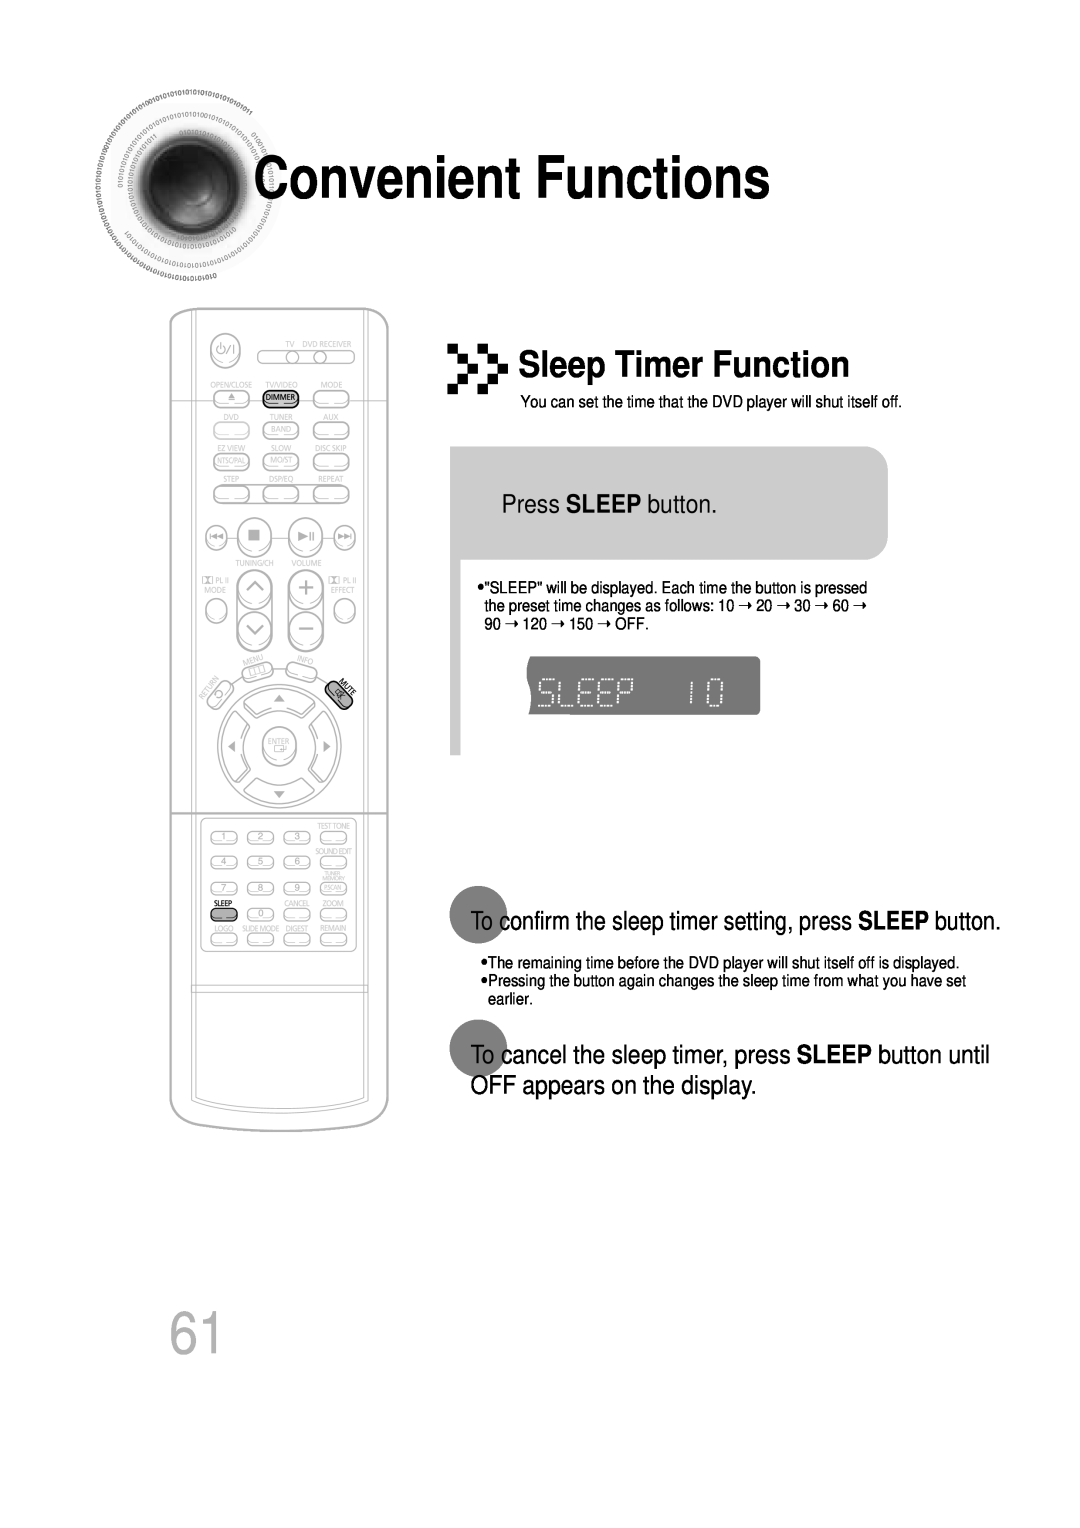 Samsung HT-DB600 ConvenientFunctions, Sleep Timer Function, Press SLEEP button, OFF appears on the display 